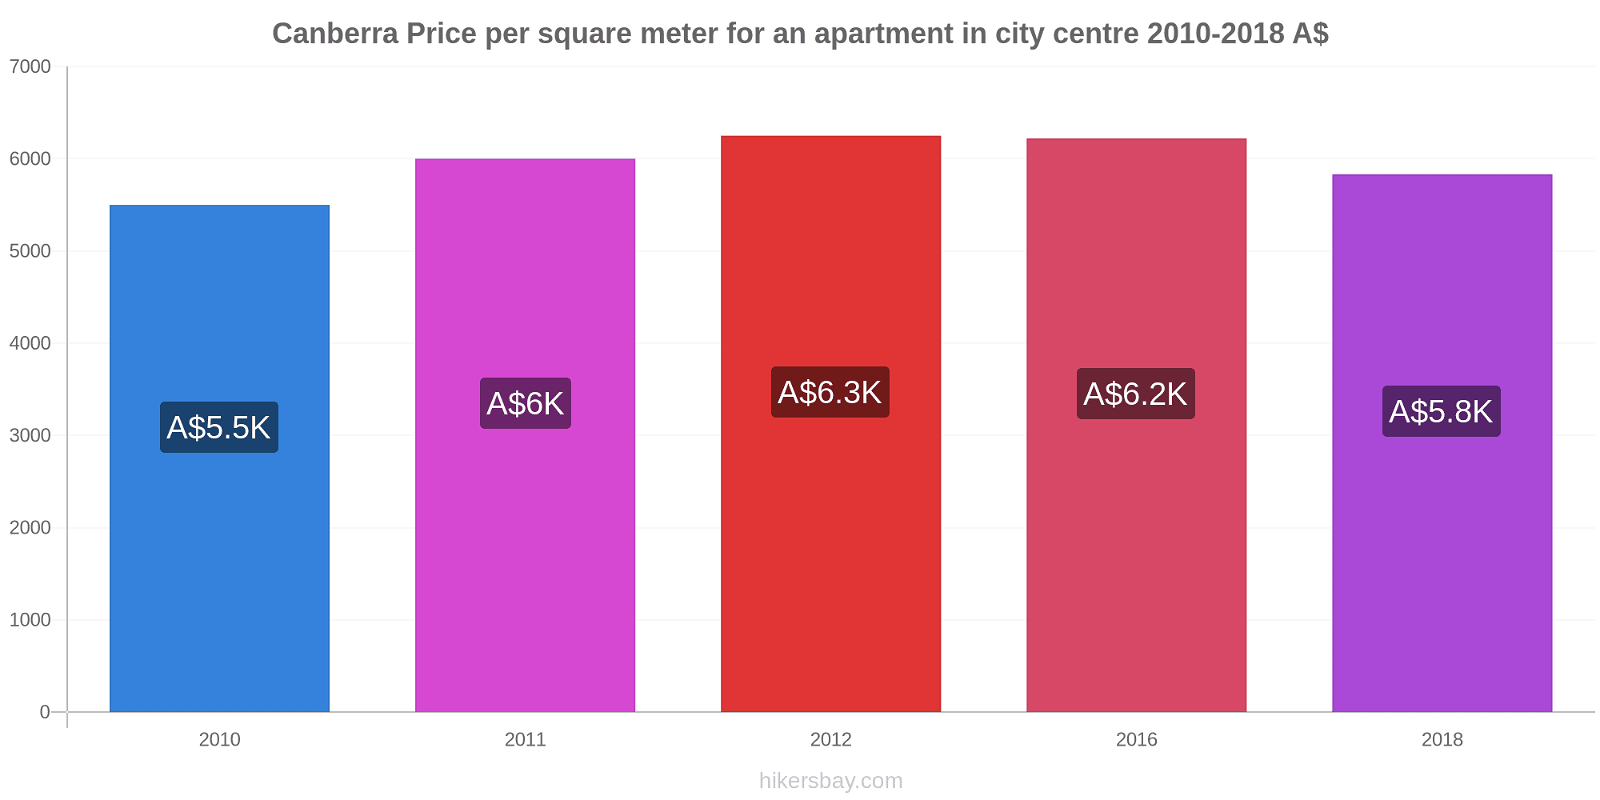 Canberra price changes Price per square meter for an apartment in city centre hikersbay.com